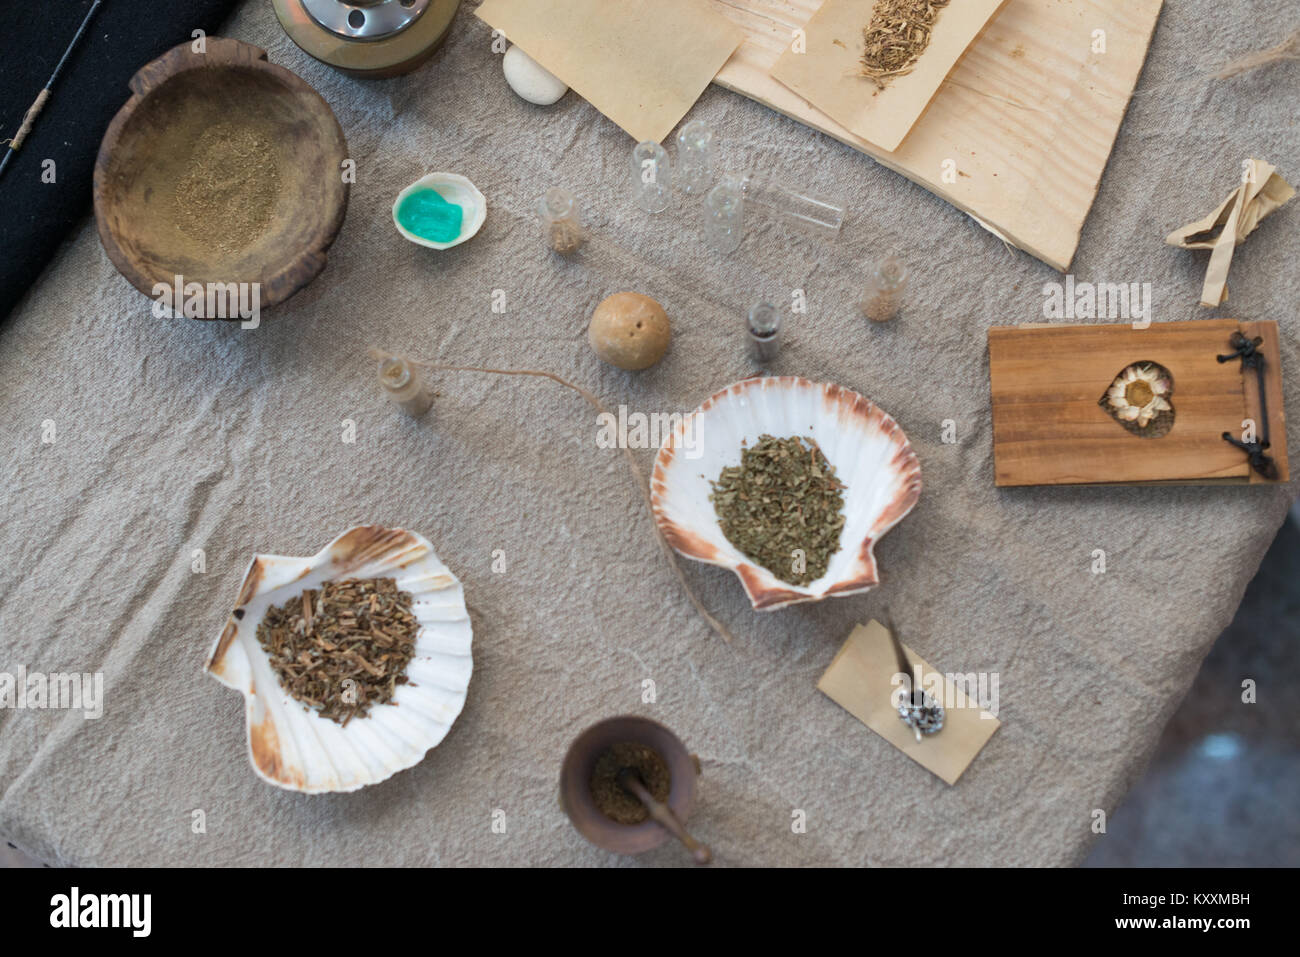 traditional medication mixied on a medieval festival in europe Stock Photo